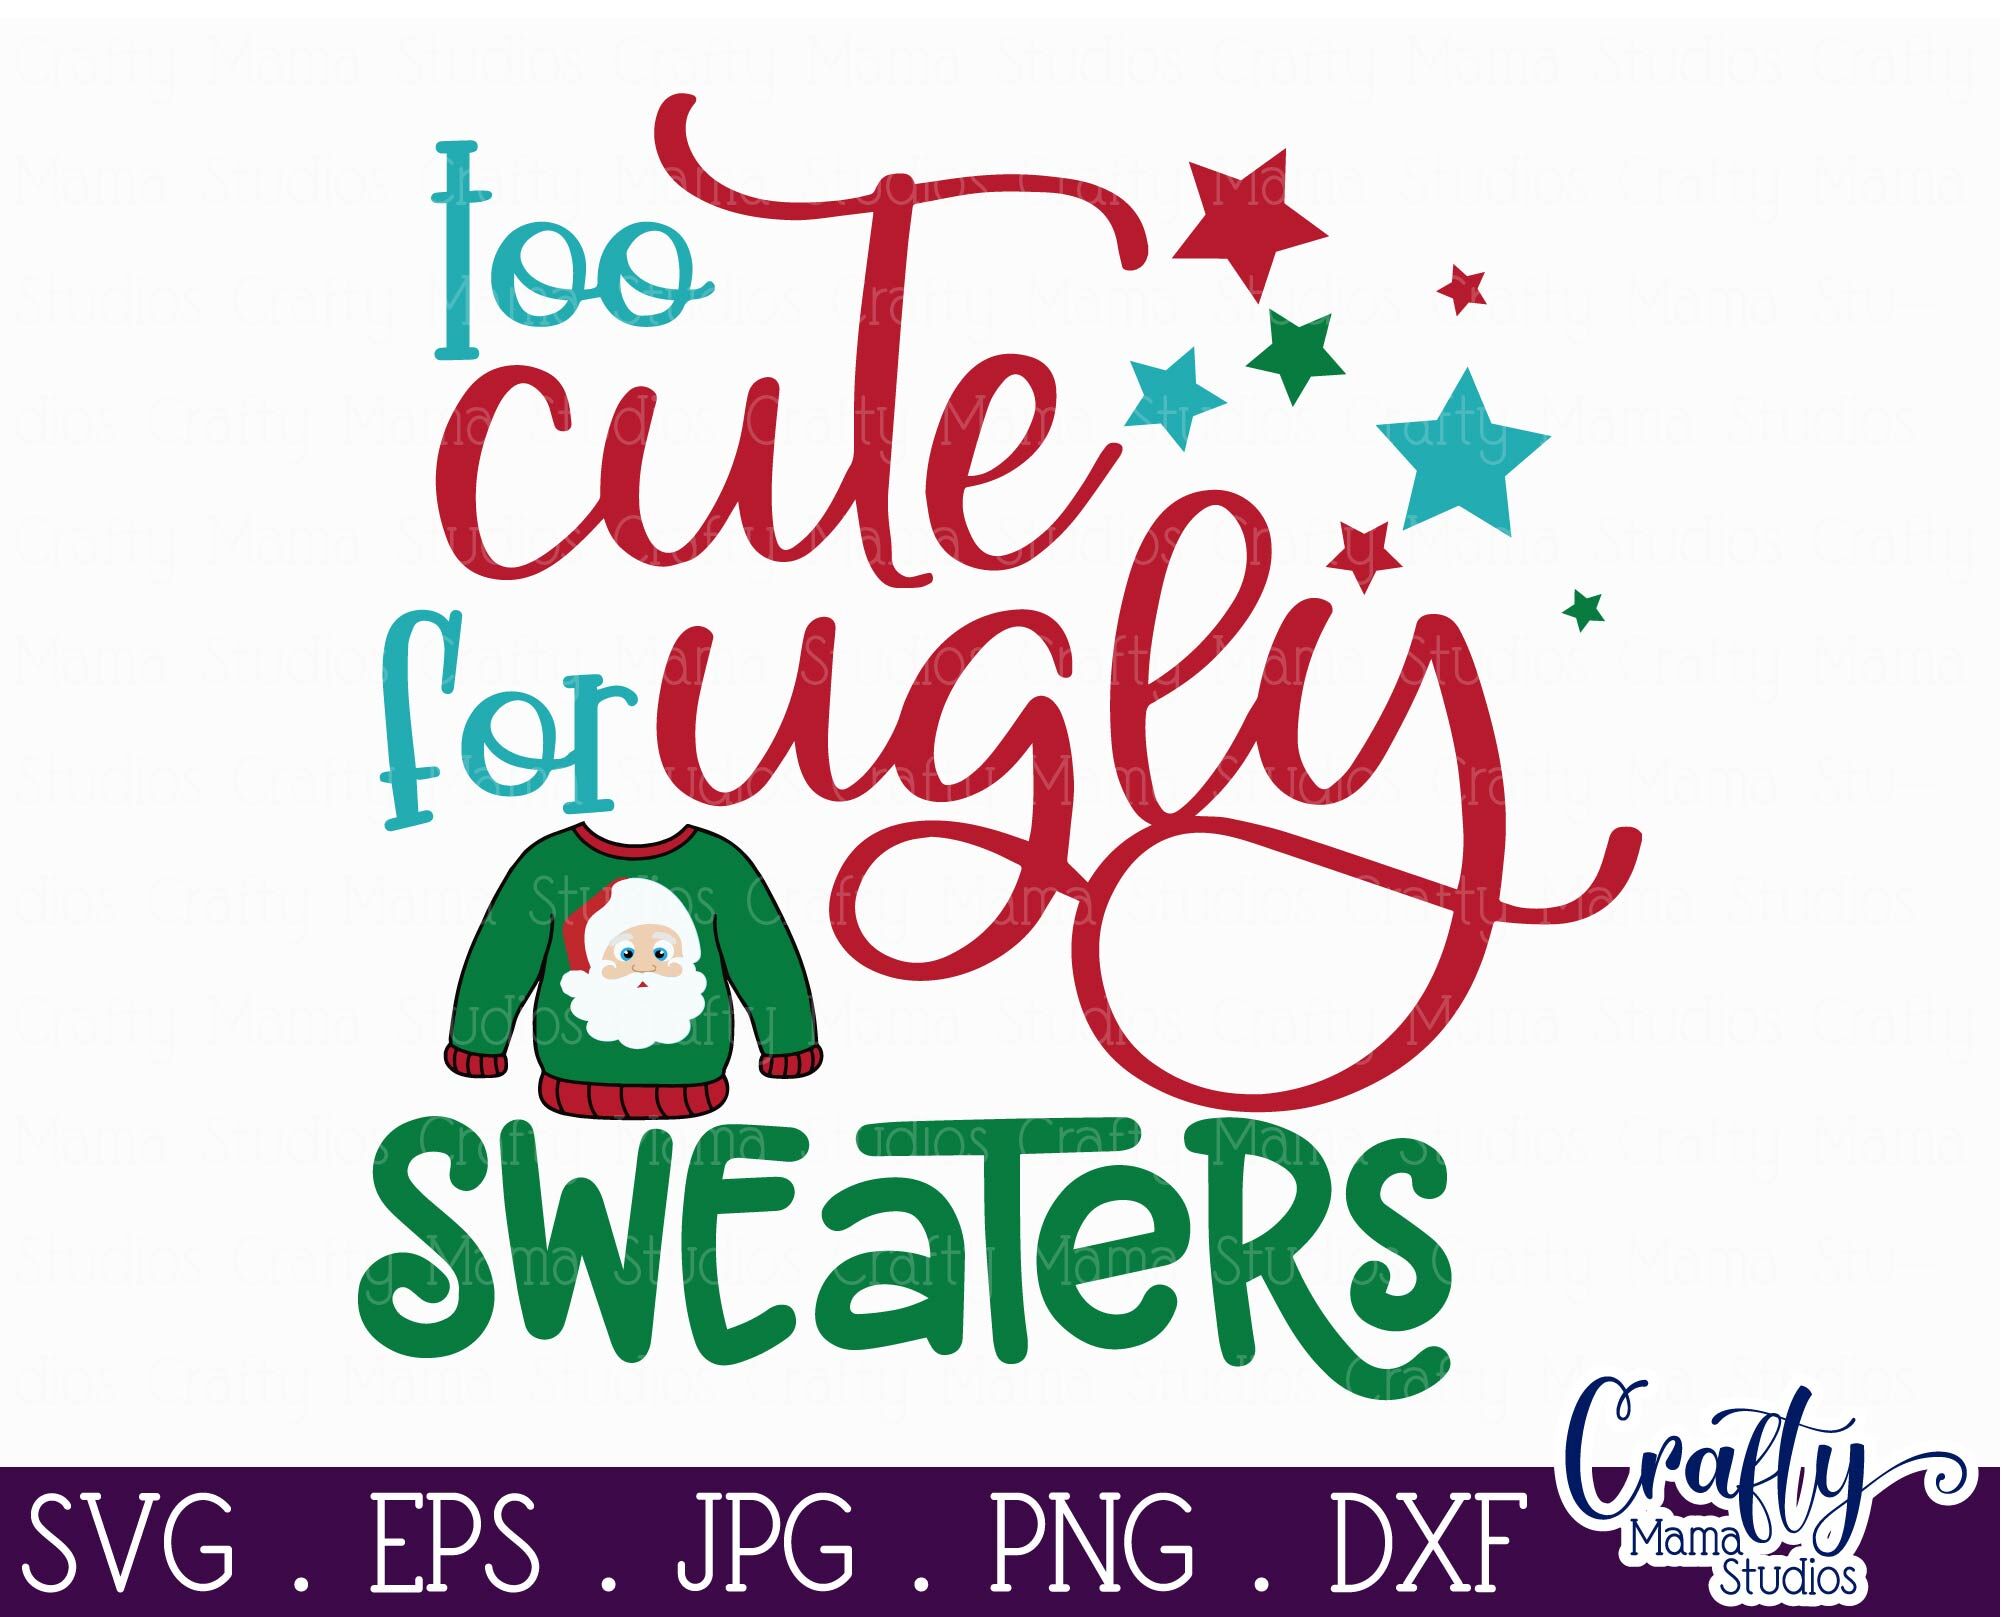 Download Christmas Svg Too Cute For Ugly Sweaters Christmas Sweater By Crafty Mama Studios Thehungryjpeg Com